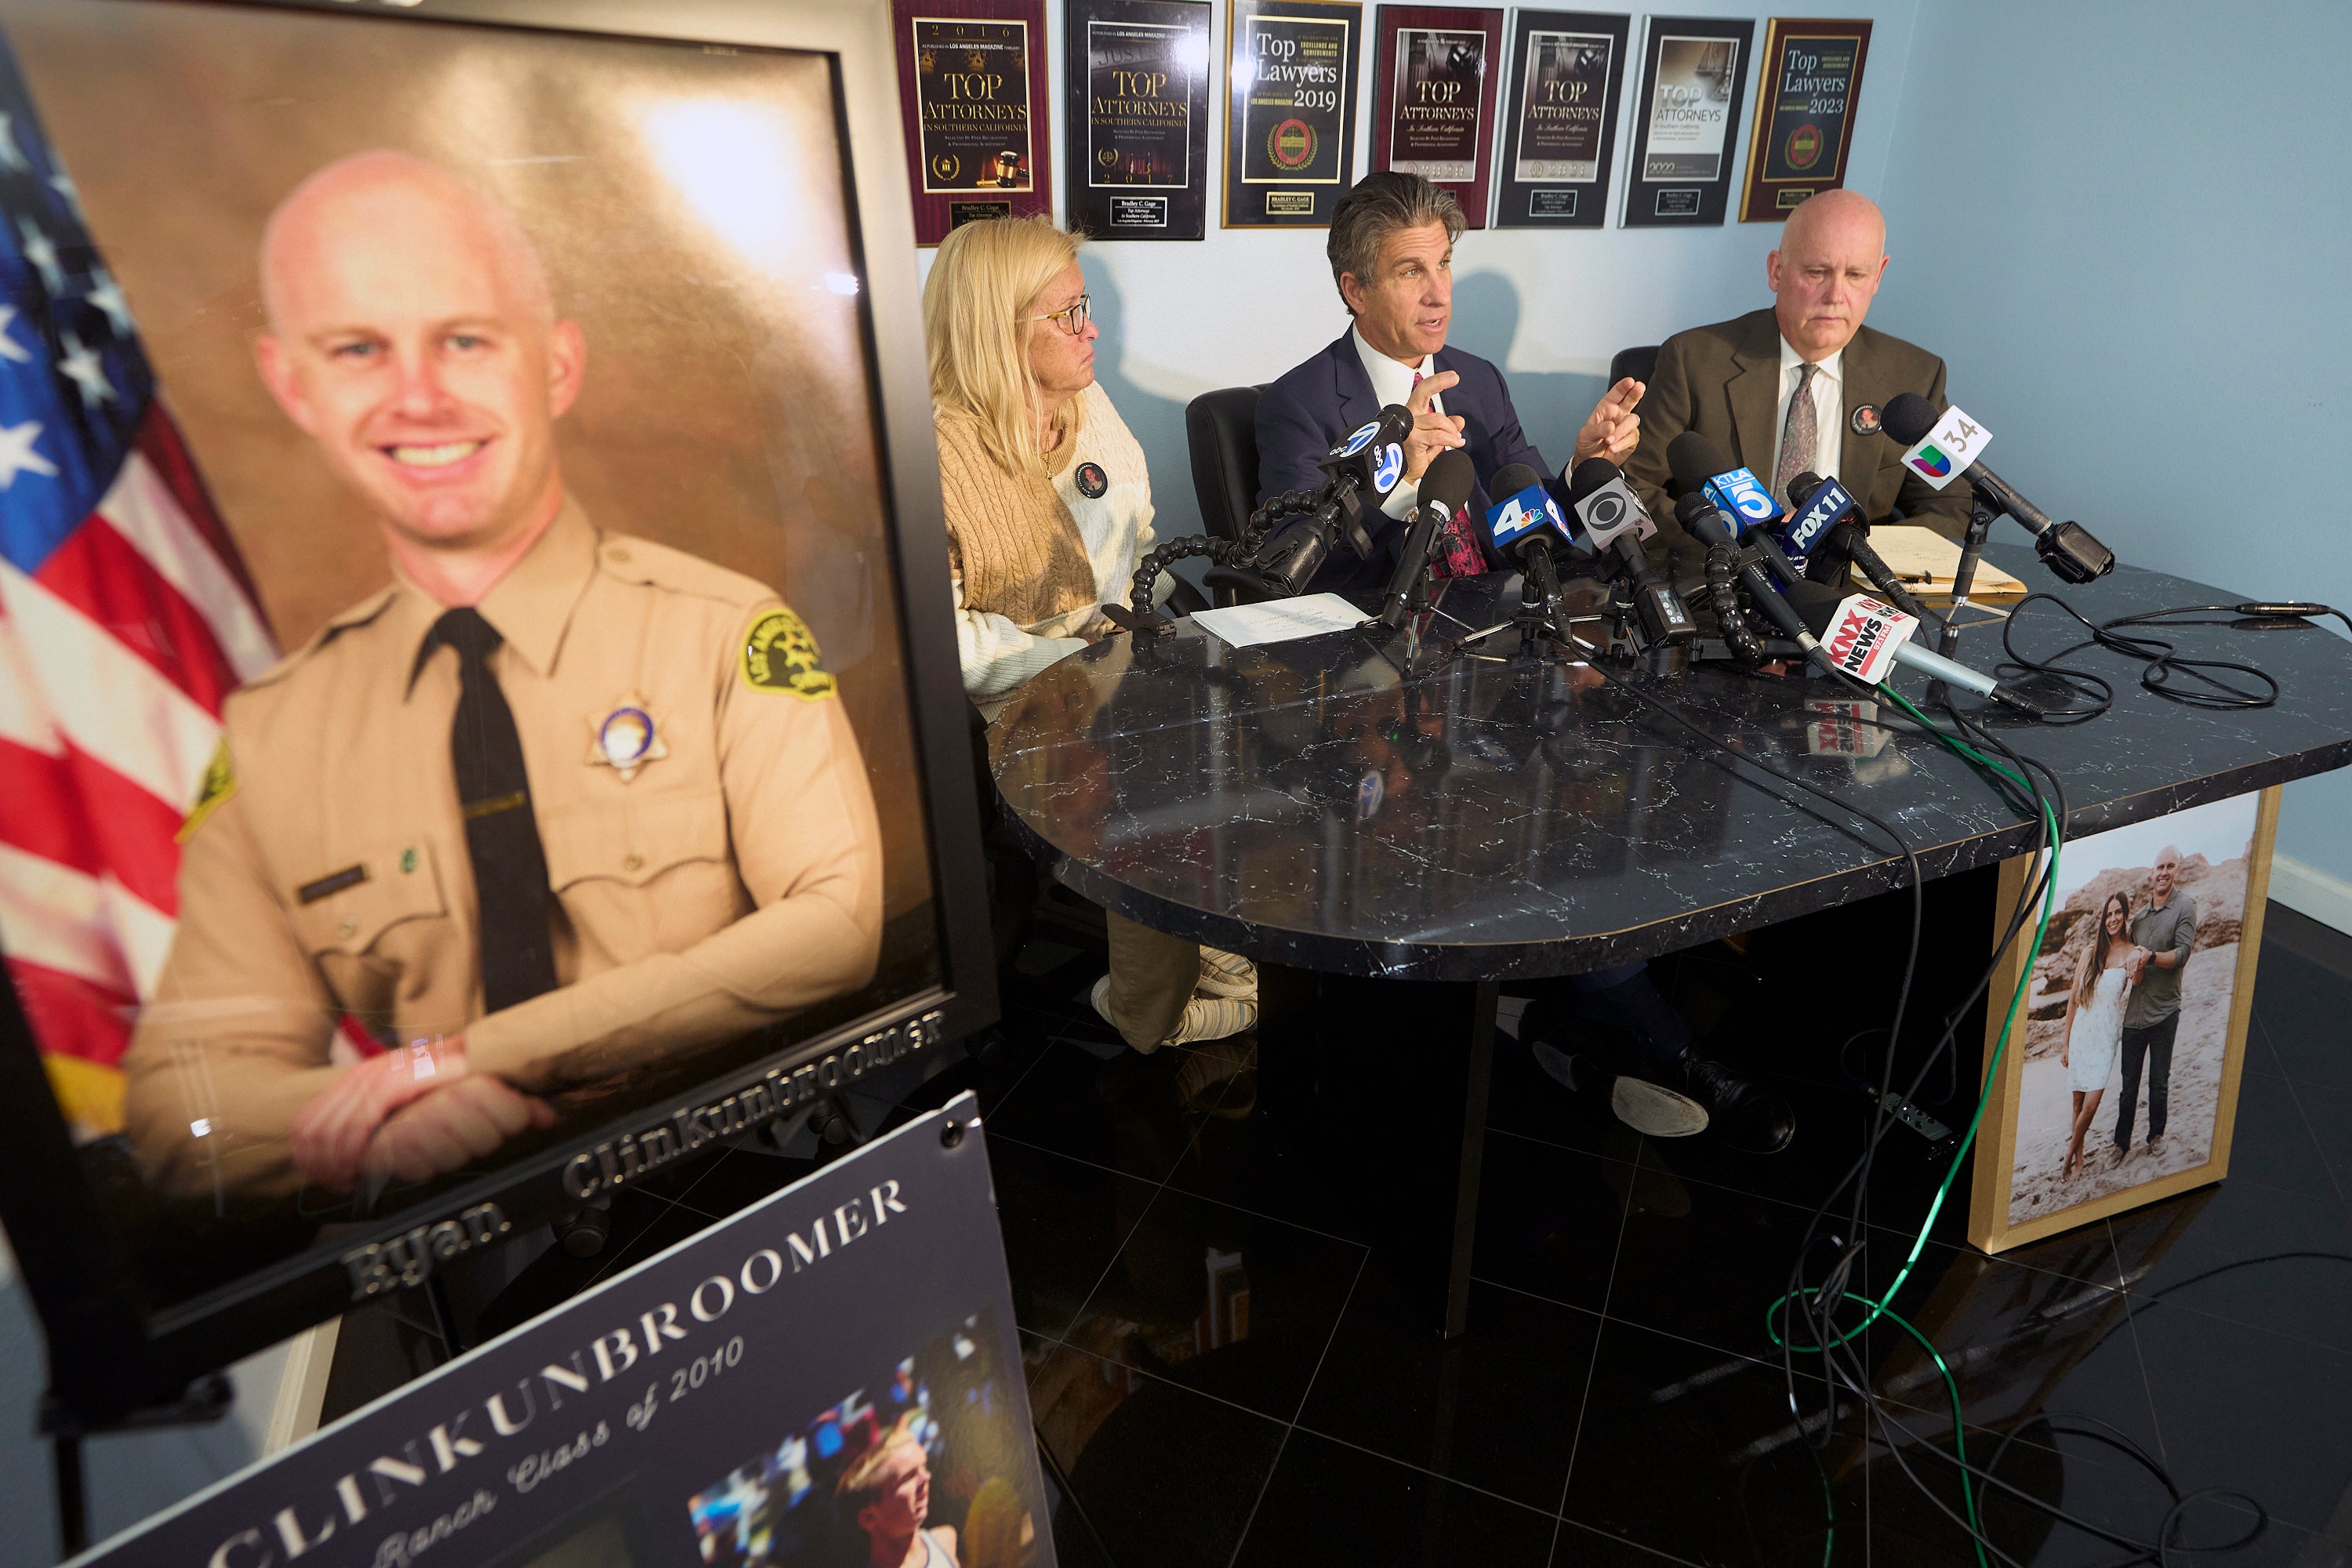 Attorney Bradley Gage, middle, and Kim Clinkunbroomer, left, and Mike Clinkunbroomer, the parents of late Los Angeles Sheriff's Deputy Ryan Clinkunbroomer, pictured left, announce the precursor of a lawsuit against the Sheriff's Department at a news conference in Los Angeles on Tuesday, Nov. 28, 2023.